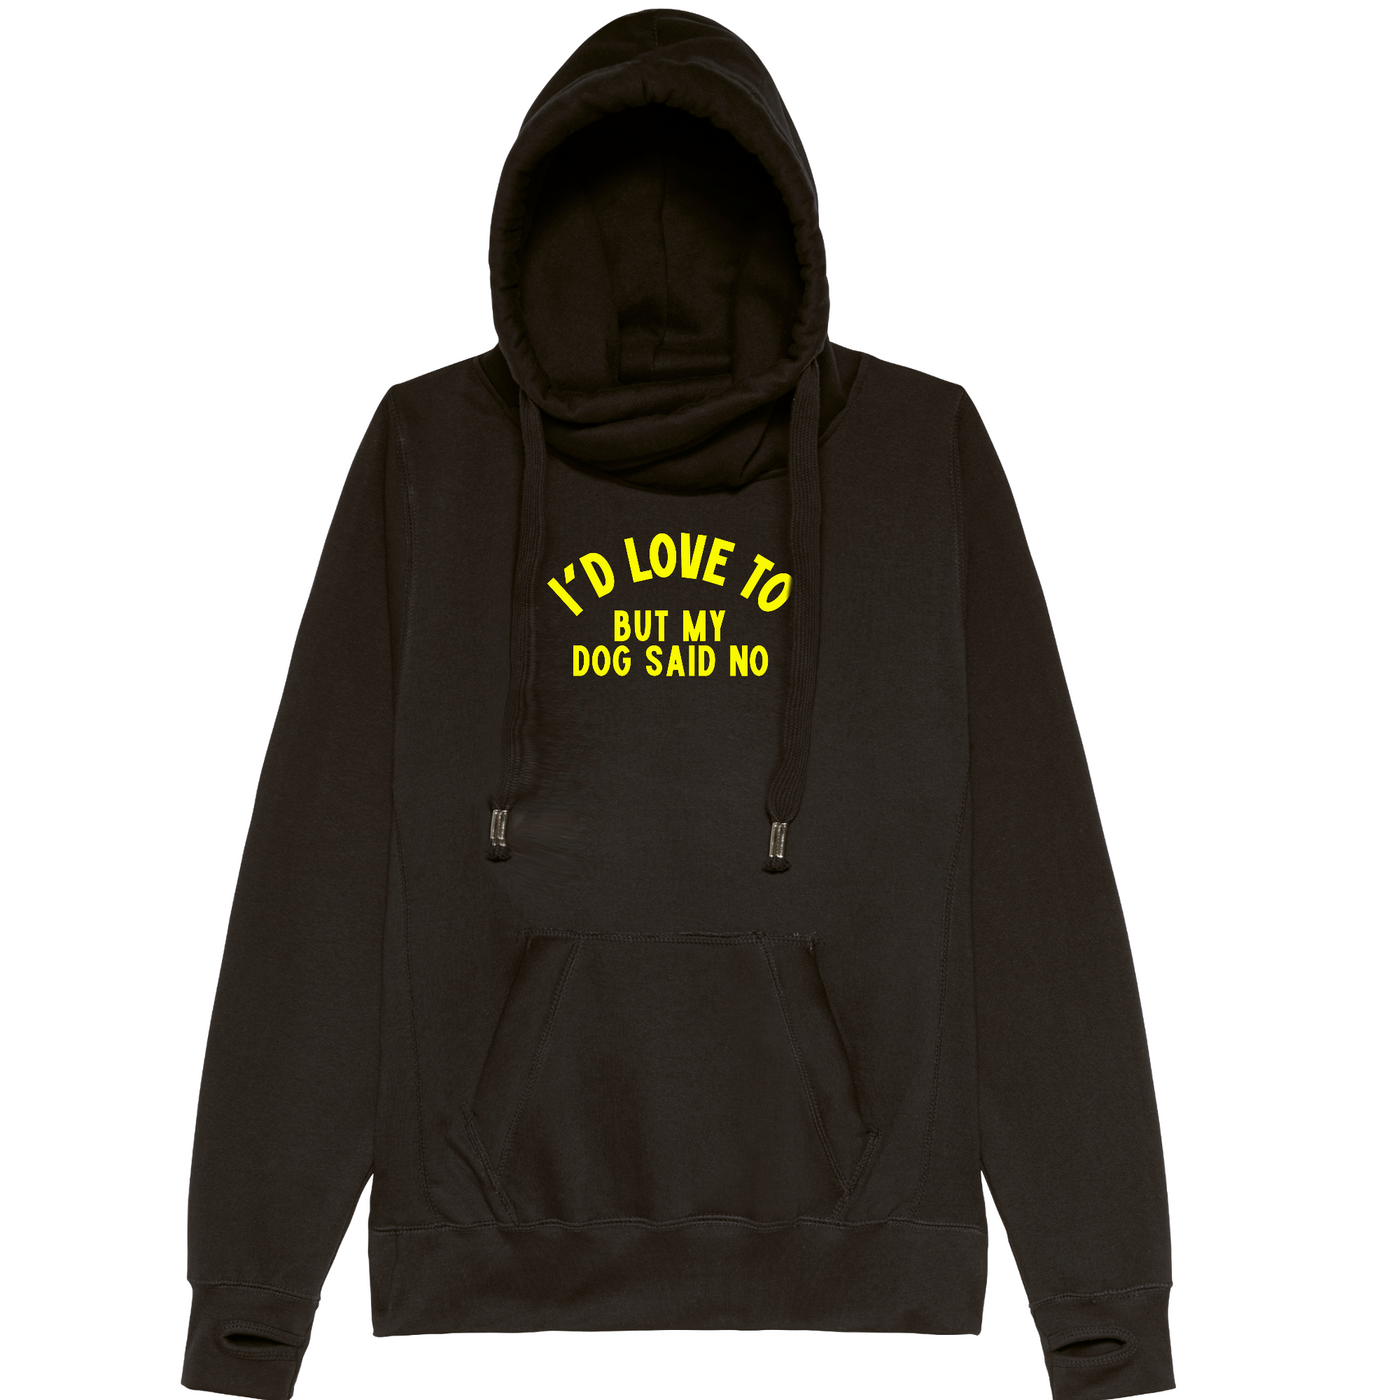 SALE - Dog Lover Hoodie - I'd Love To But My Dog Said No